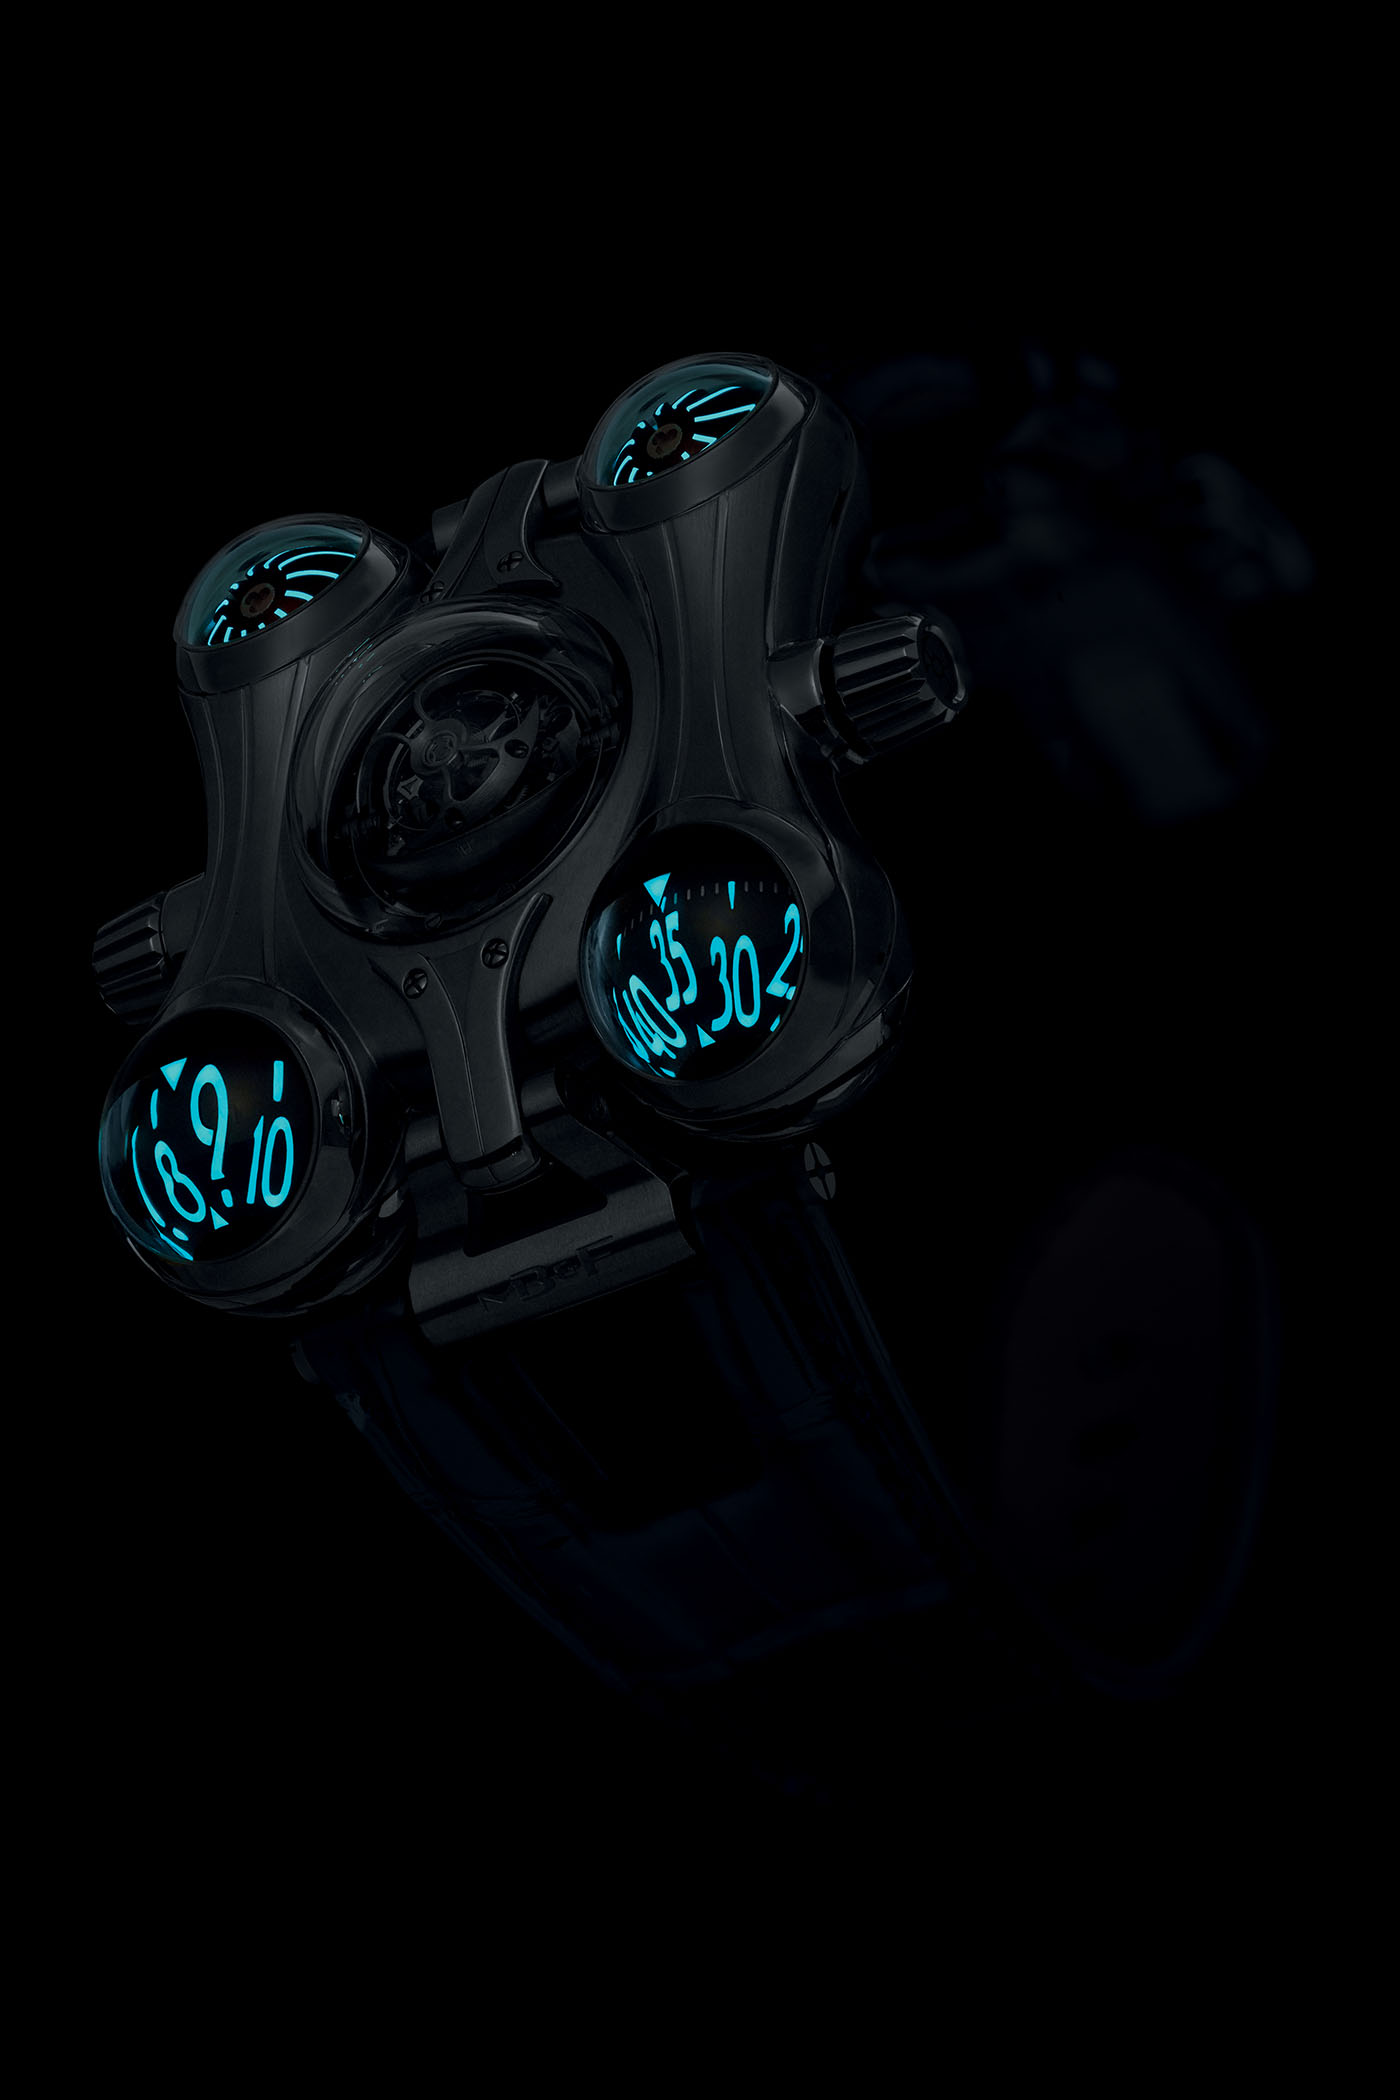 MB&F HM6 Final Edition Steel SIHH 2019